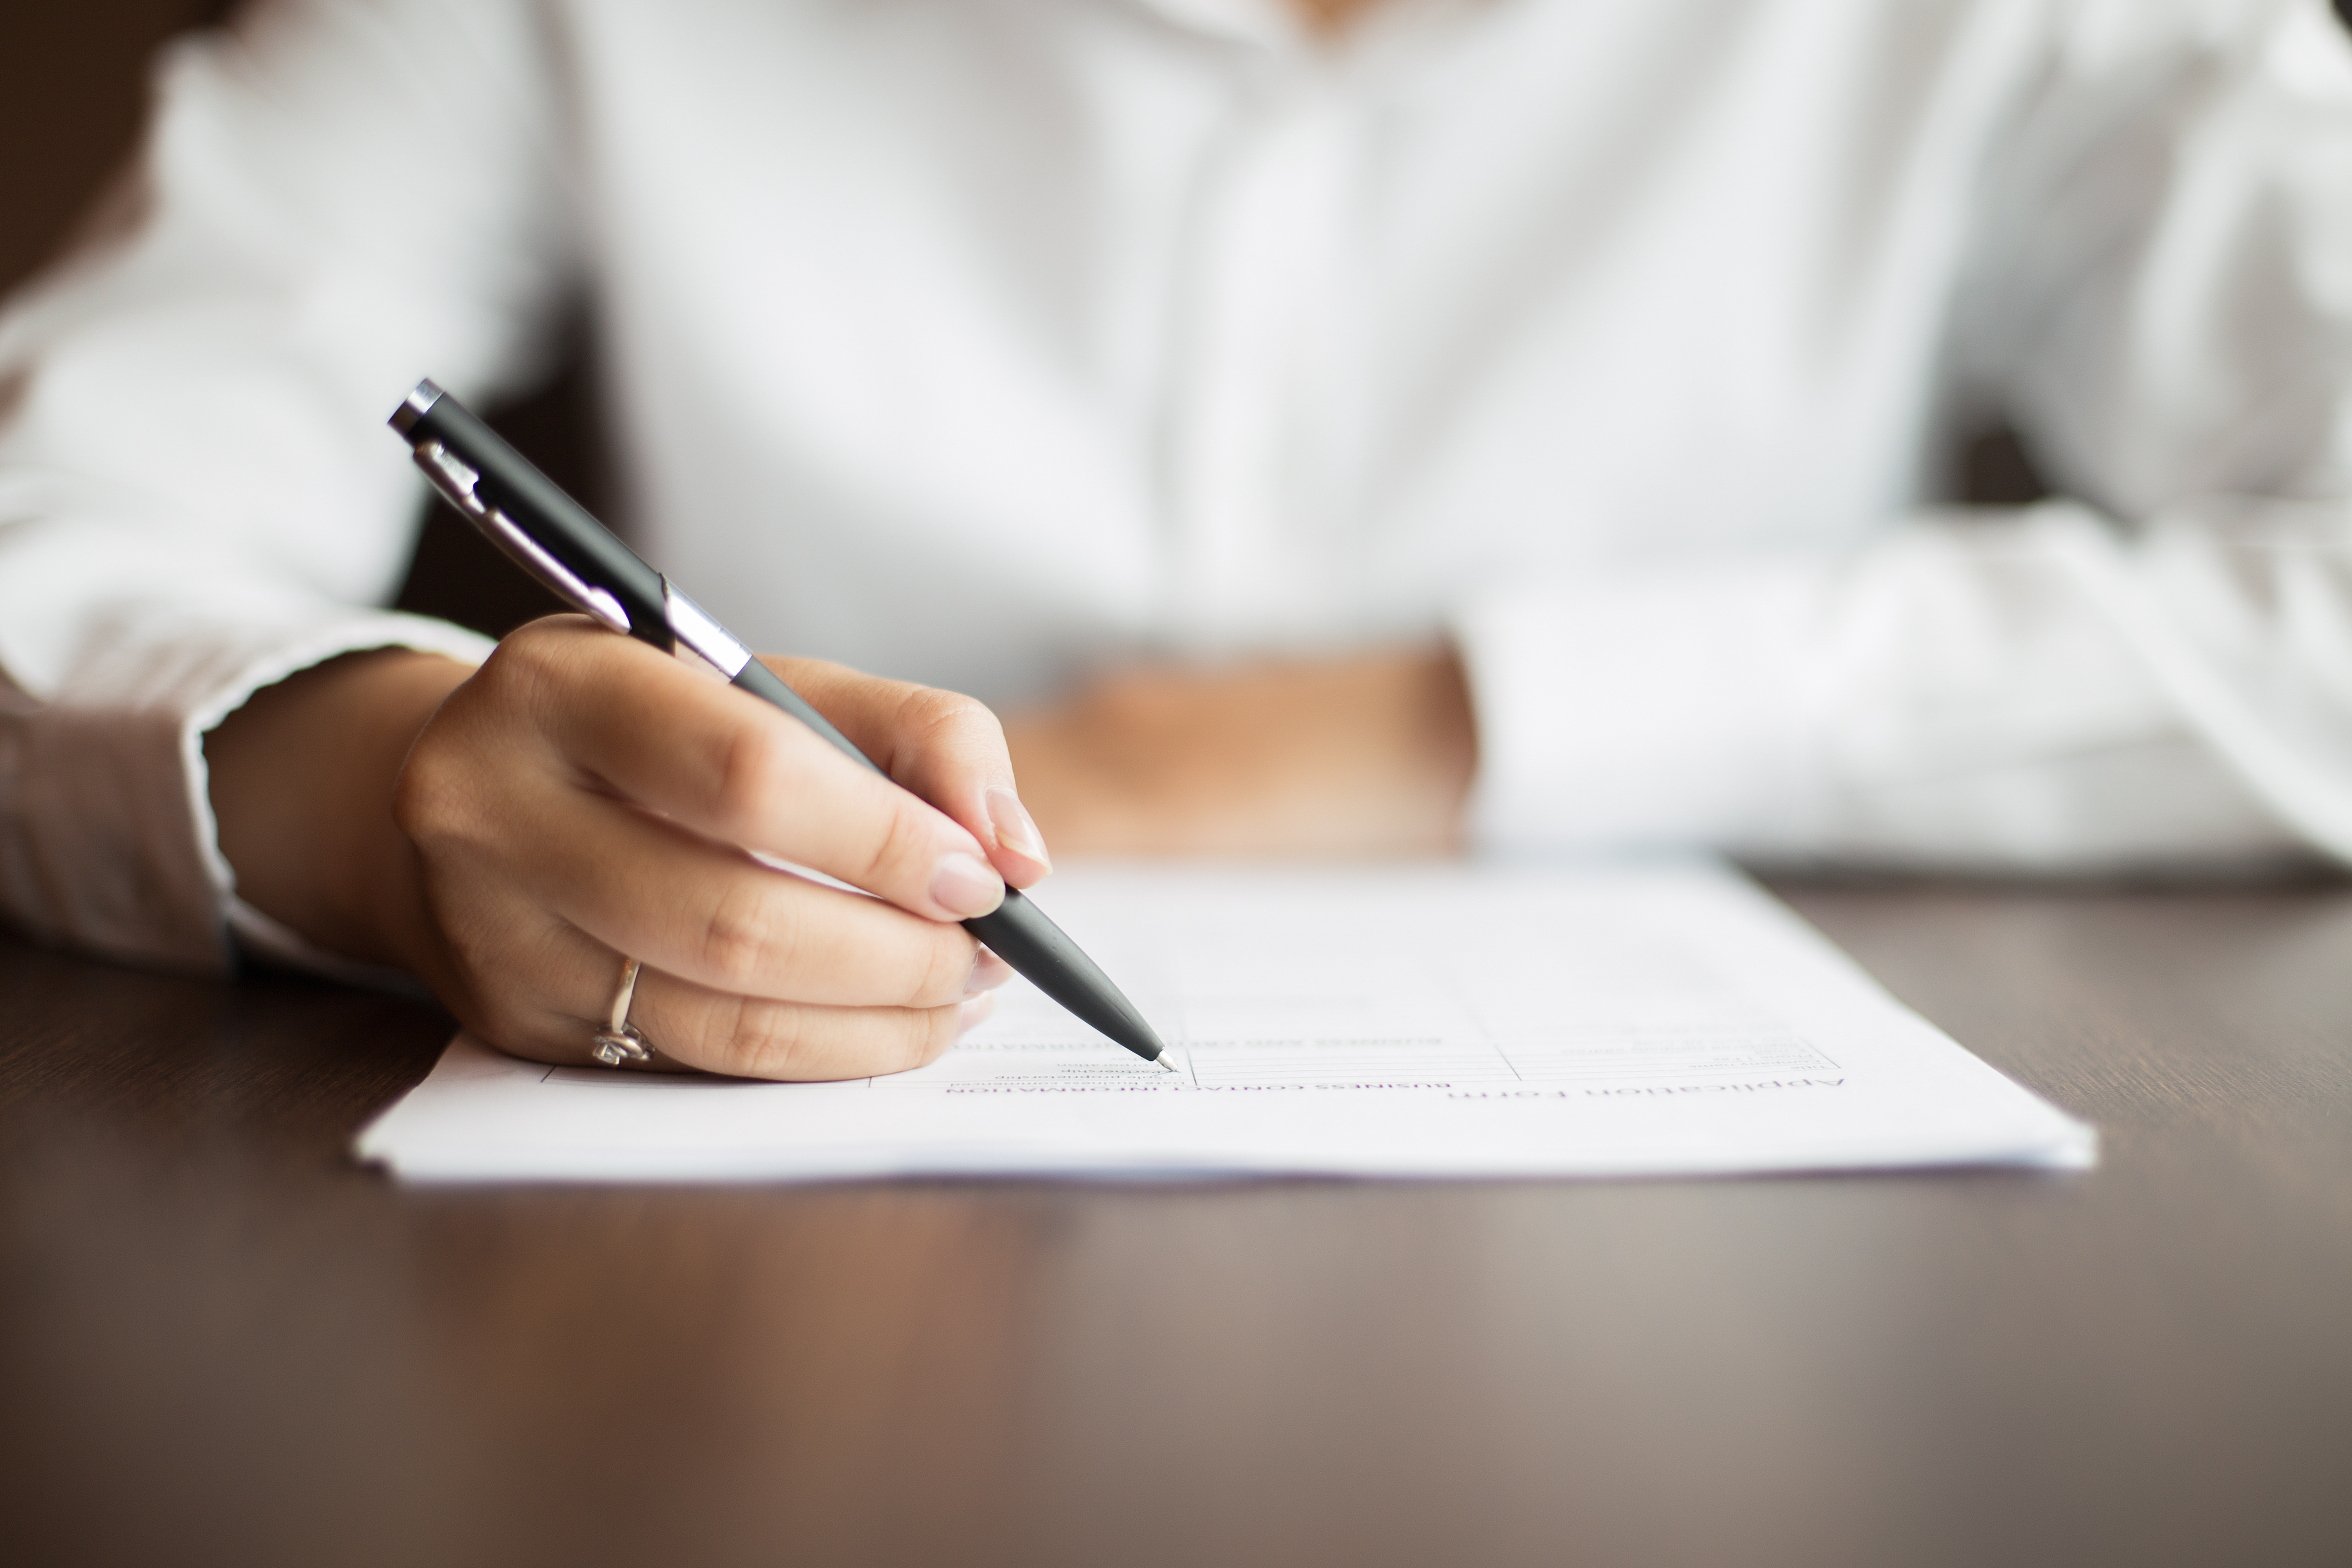 Hand of young businesswoman wearing ring and sitting at table writing on document with pen in office